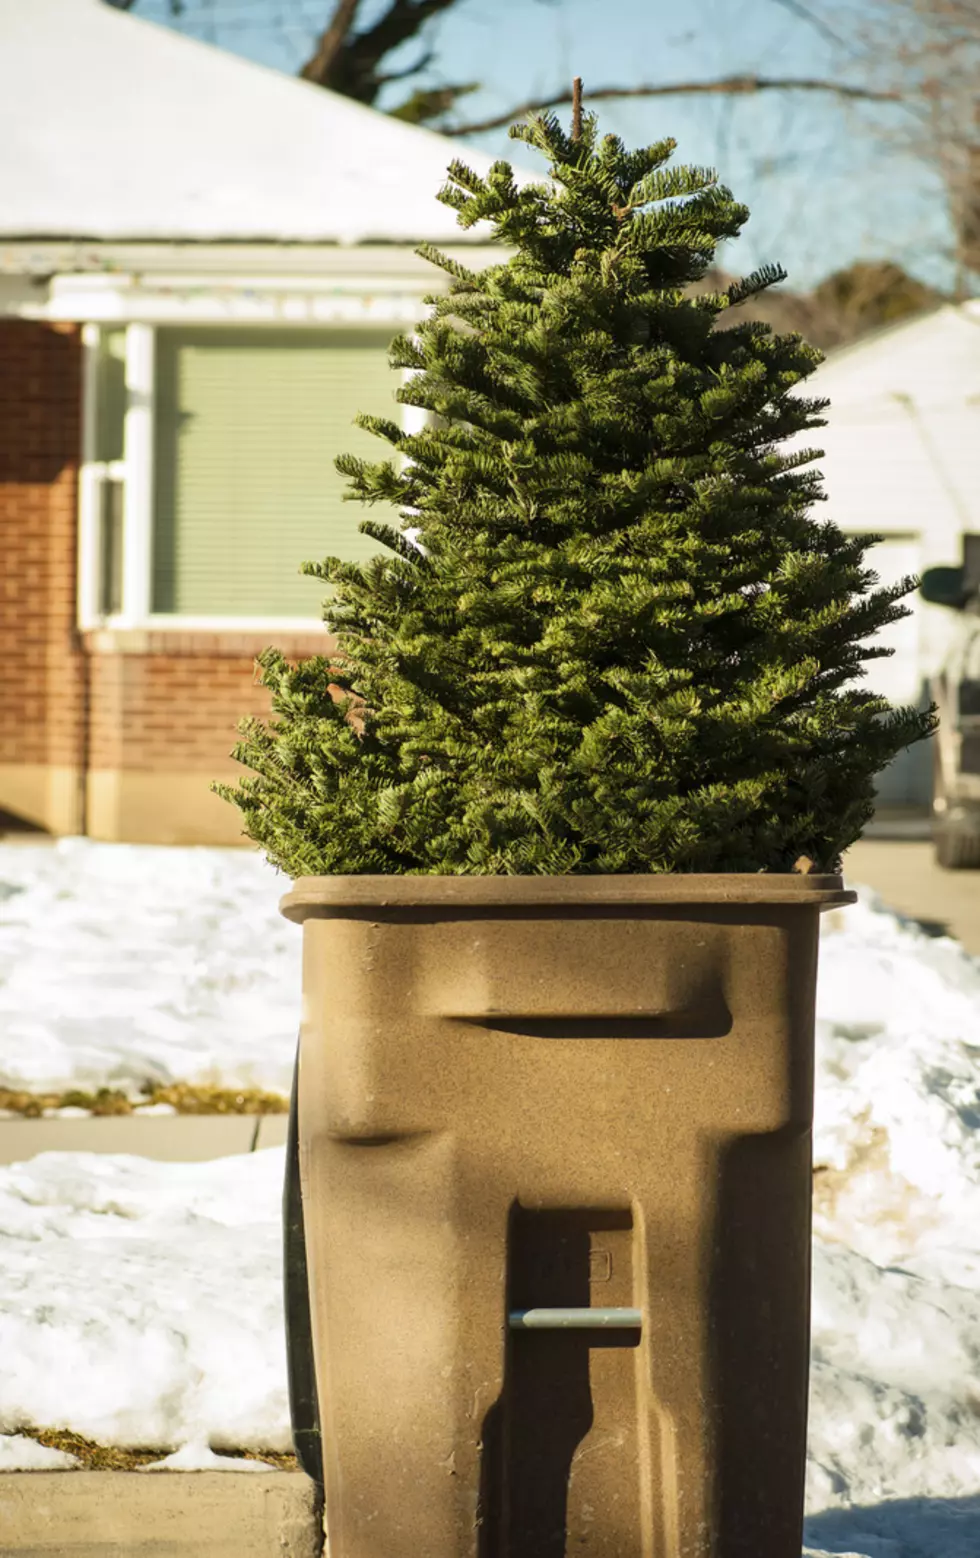 When Do You Take Down Your Christmas Tree And Lights?